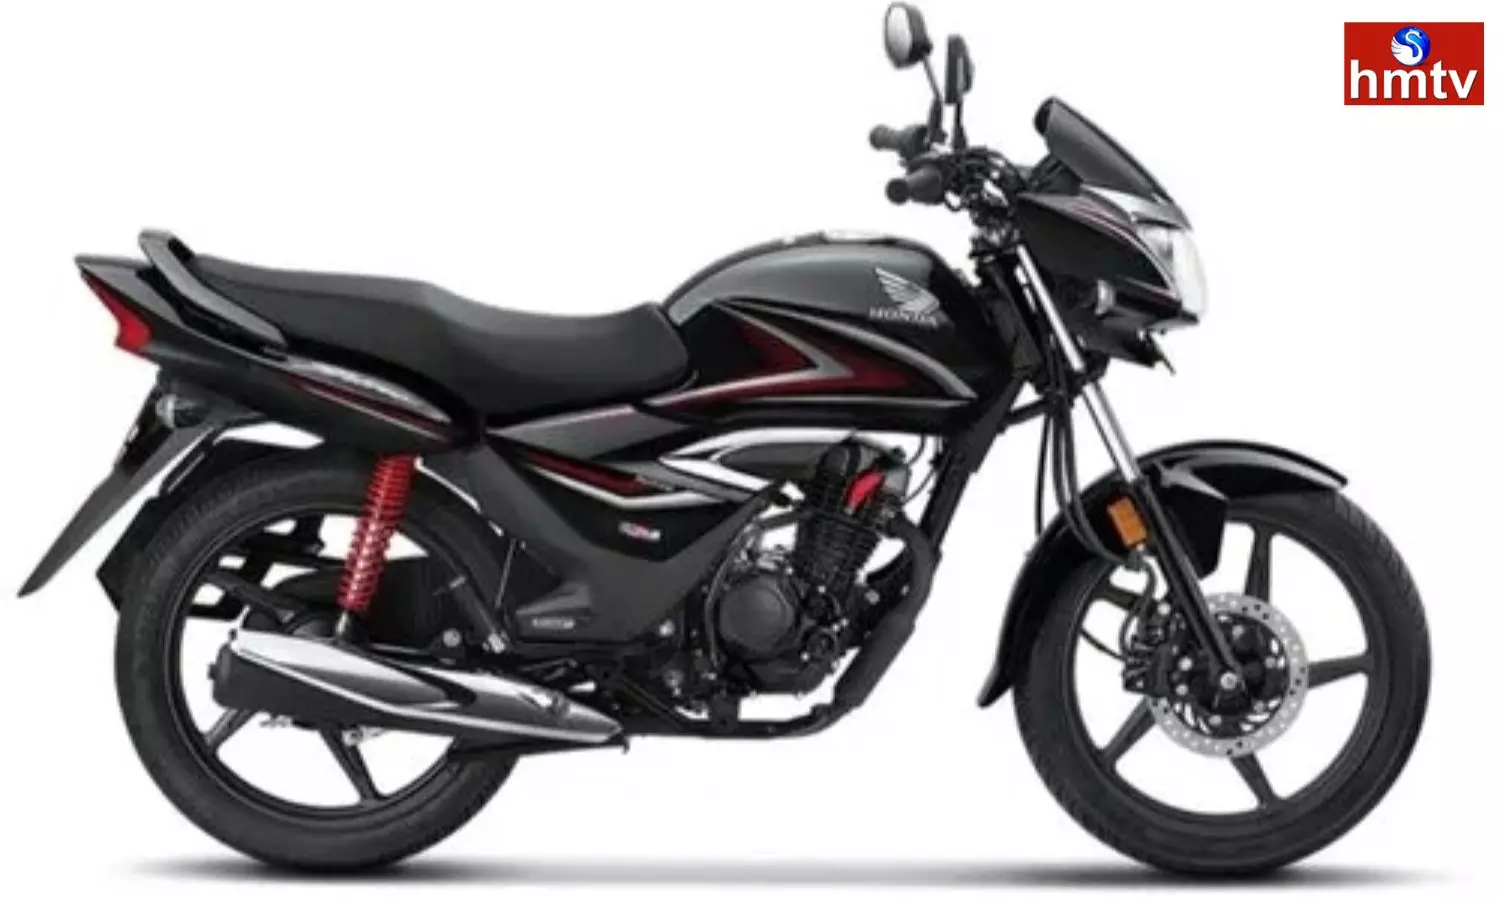 2023 Honda Shine 125 OBD2 Model Launched With Amazing Features Do you Know the Price and Mileage Check Full Details